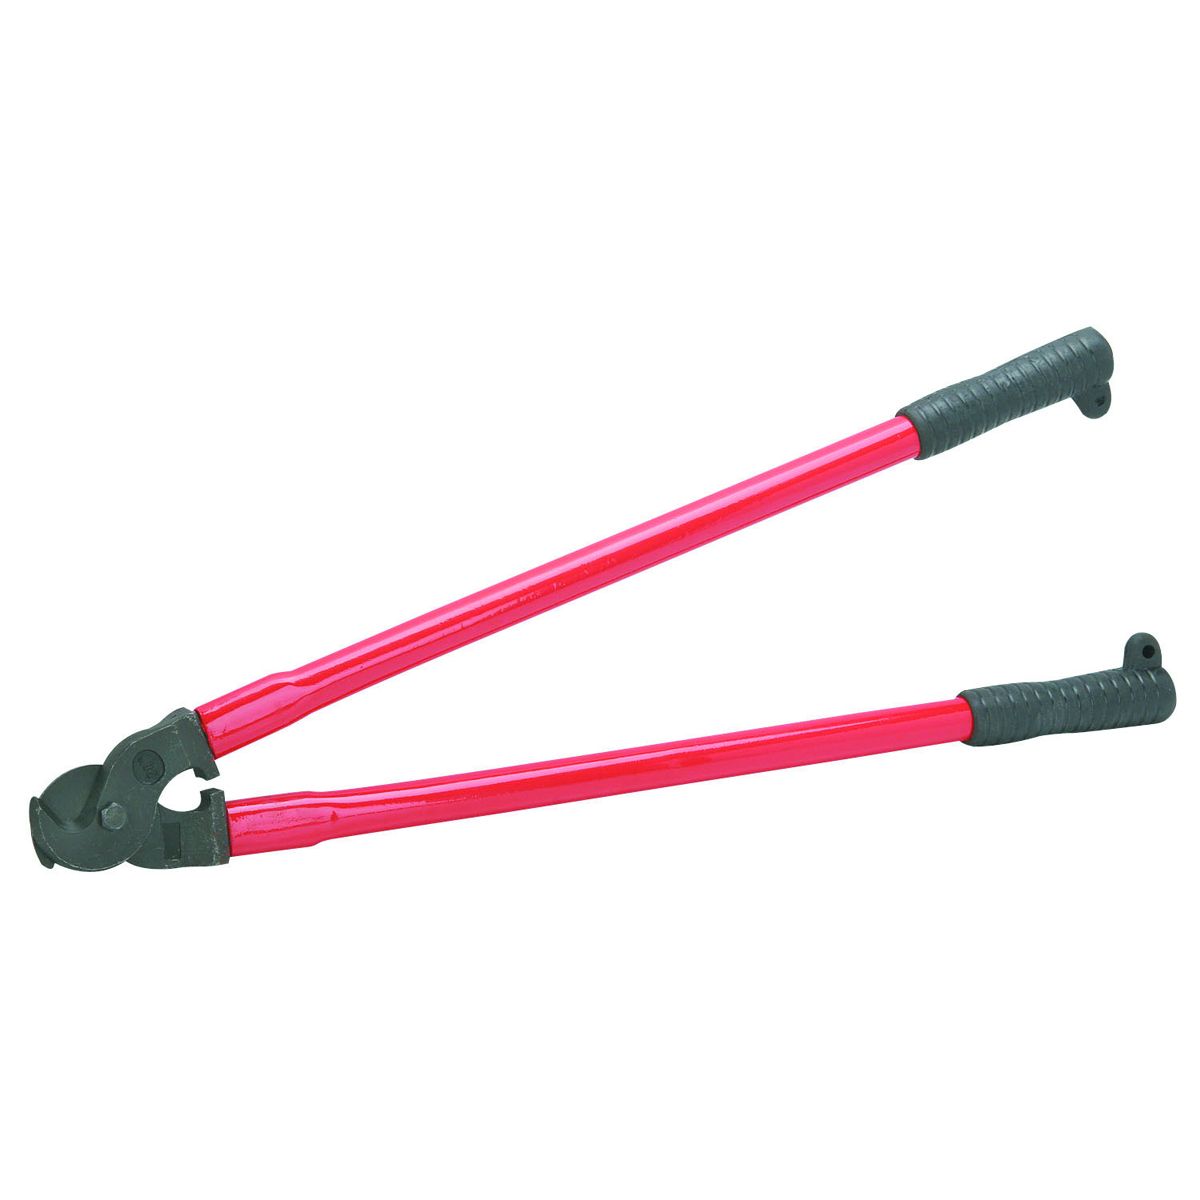 PITTSBURGH 28" Cable Cutters